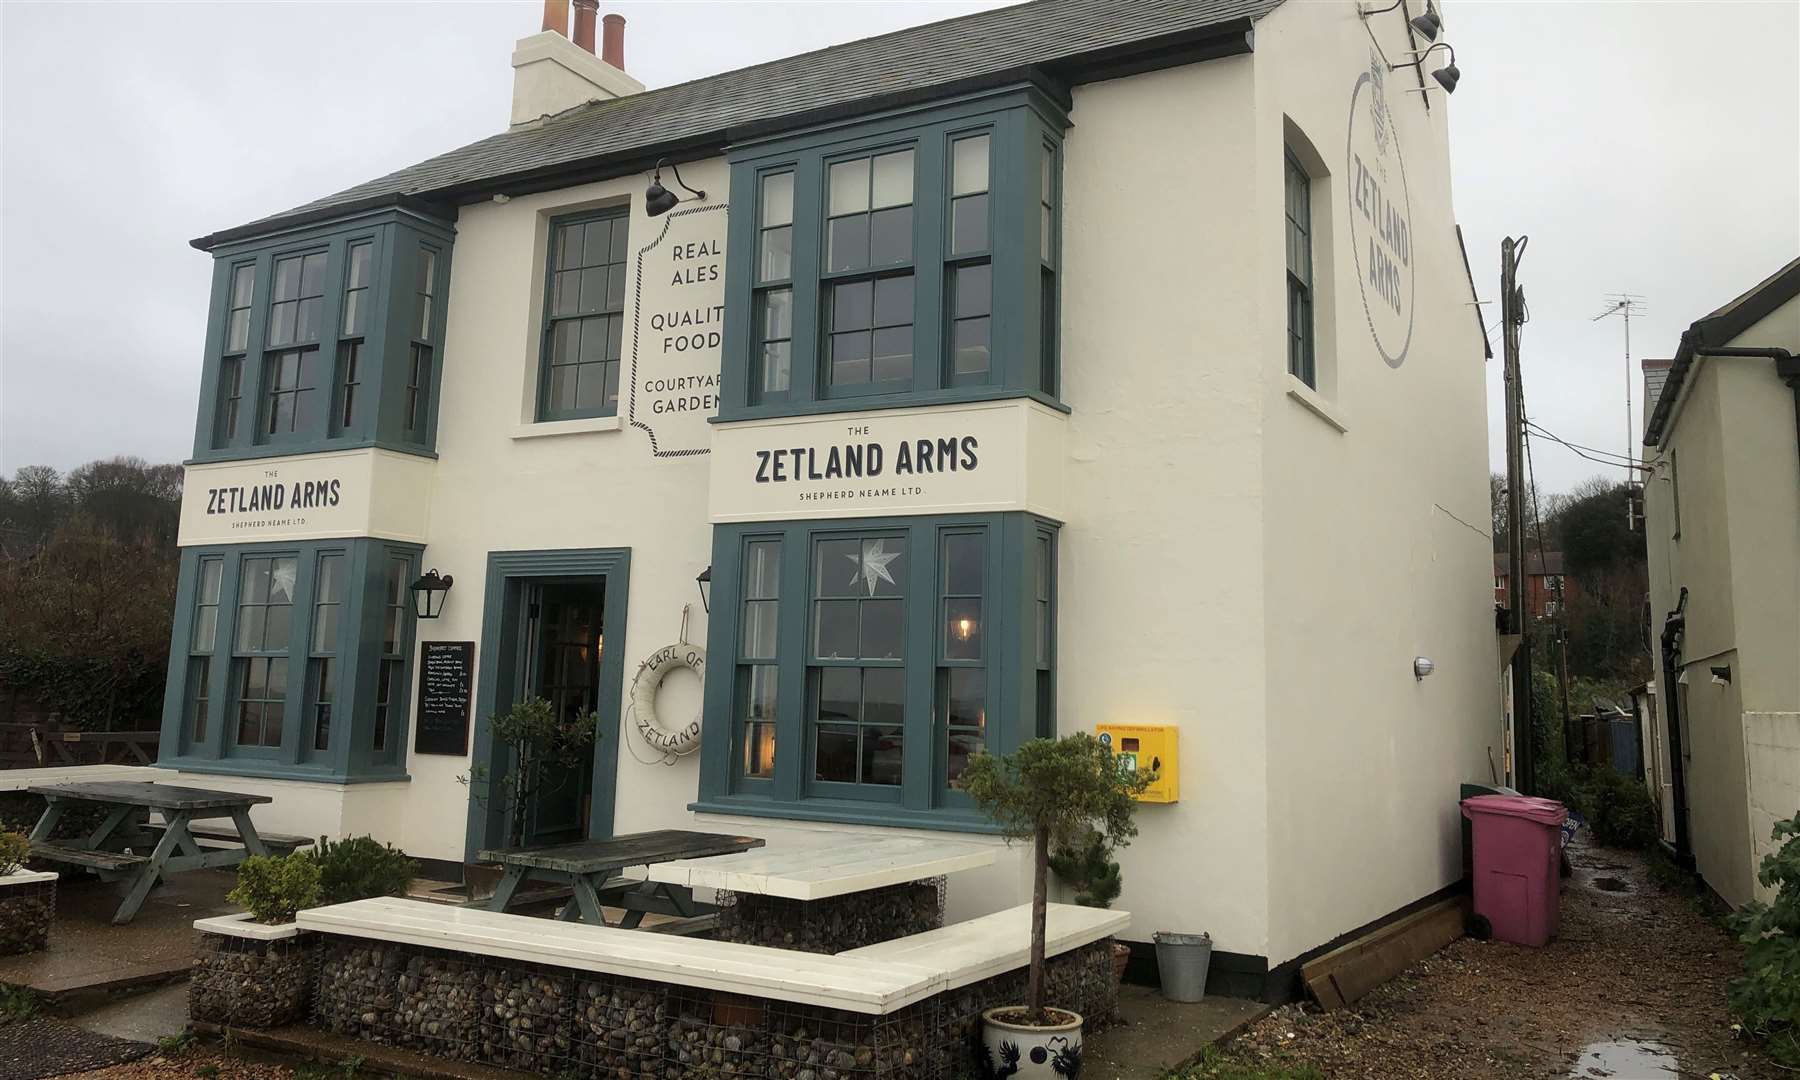 You might argue the Zetland Arms is more of a pub, but the quality of the food we were served meant I had to nominate it for Restaurant of the Year